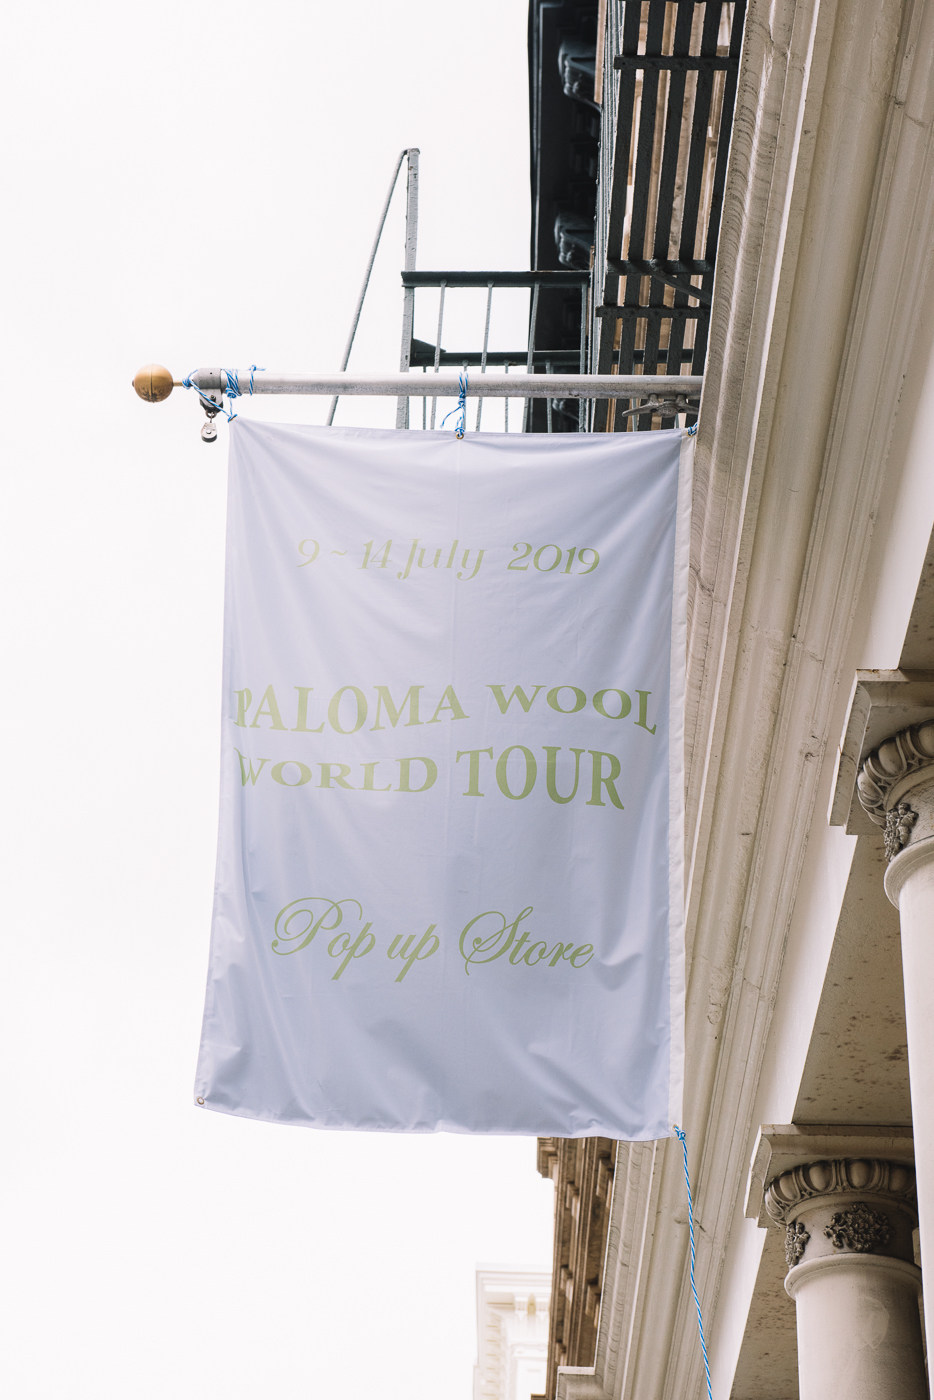 Paloma Wool, pop up, how to build a pop up, New York pop up, things to see in New York, short-term retail